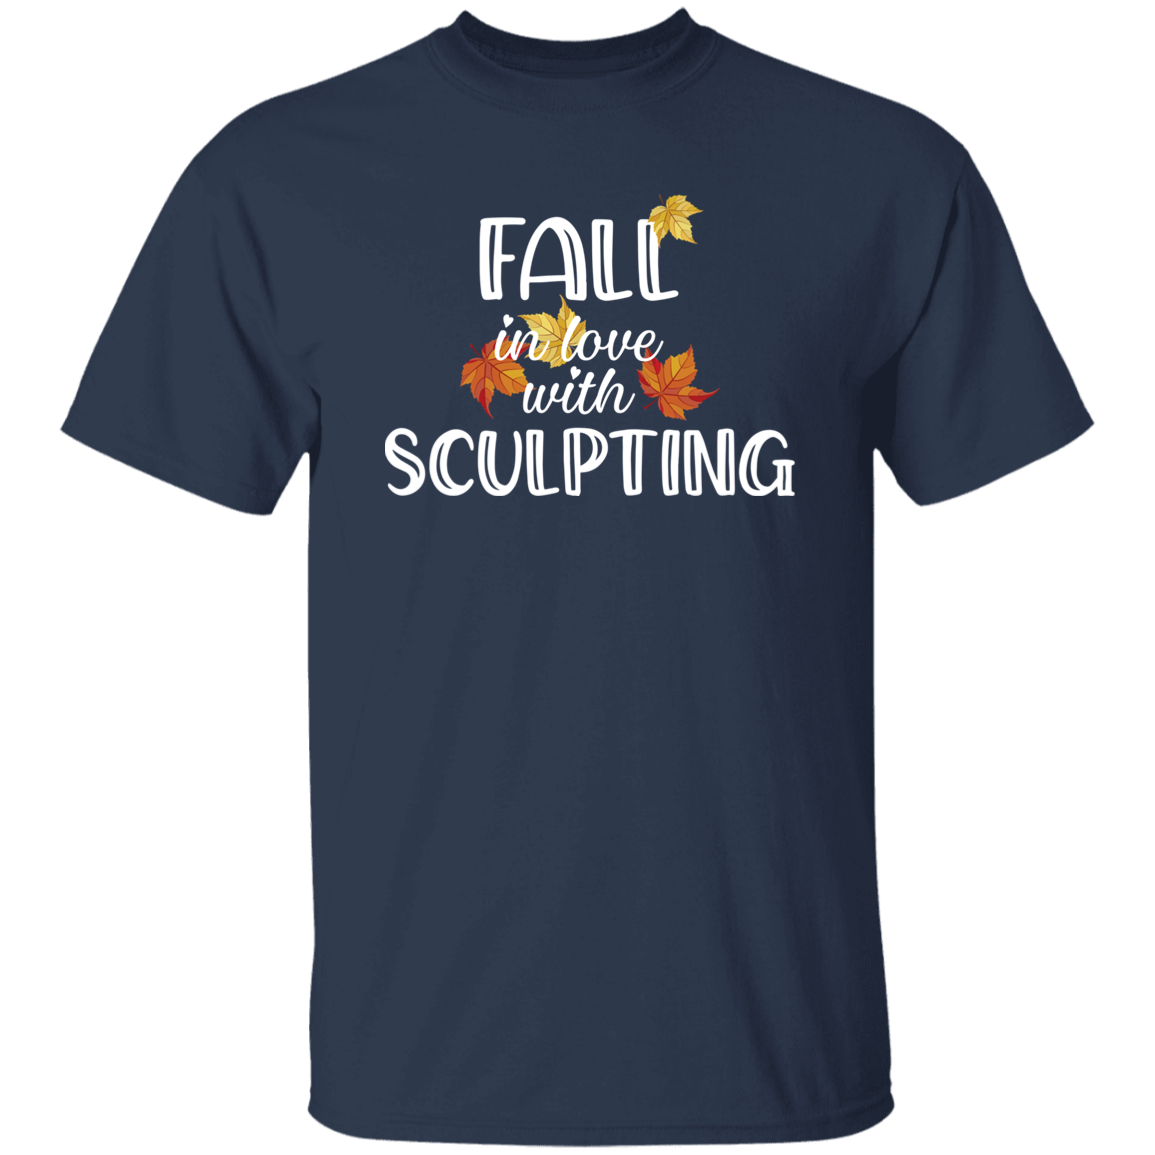 Fall in love with Sculpting T-Shirt